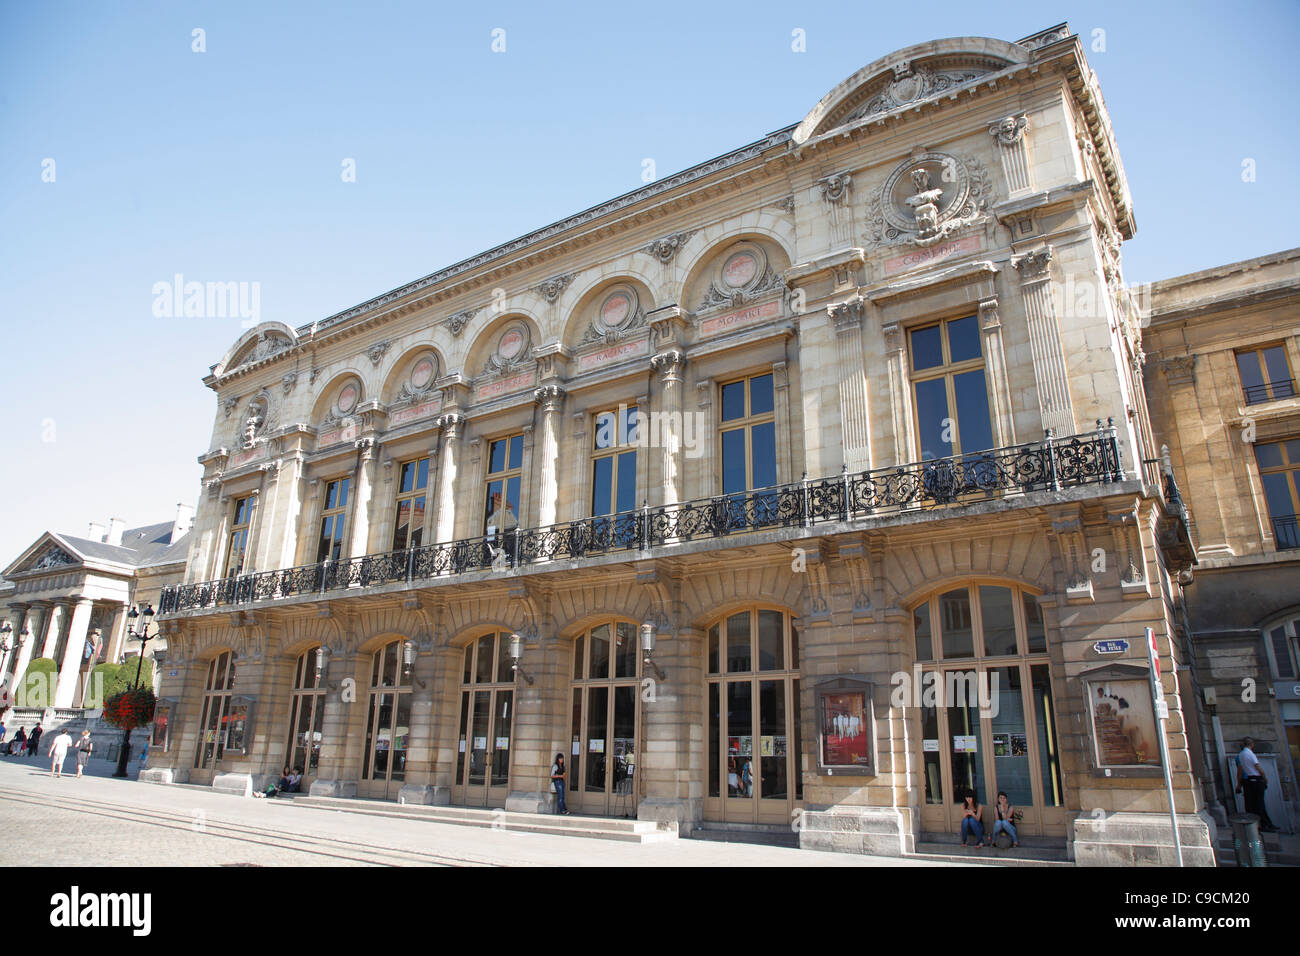 The Grand Theater, Reims, France Stock Photo